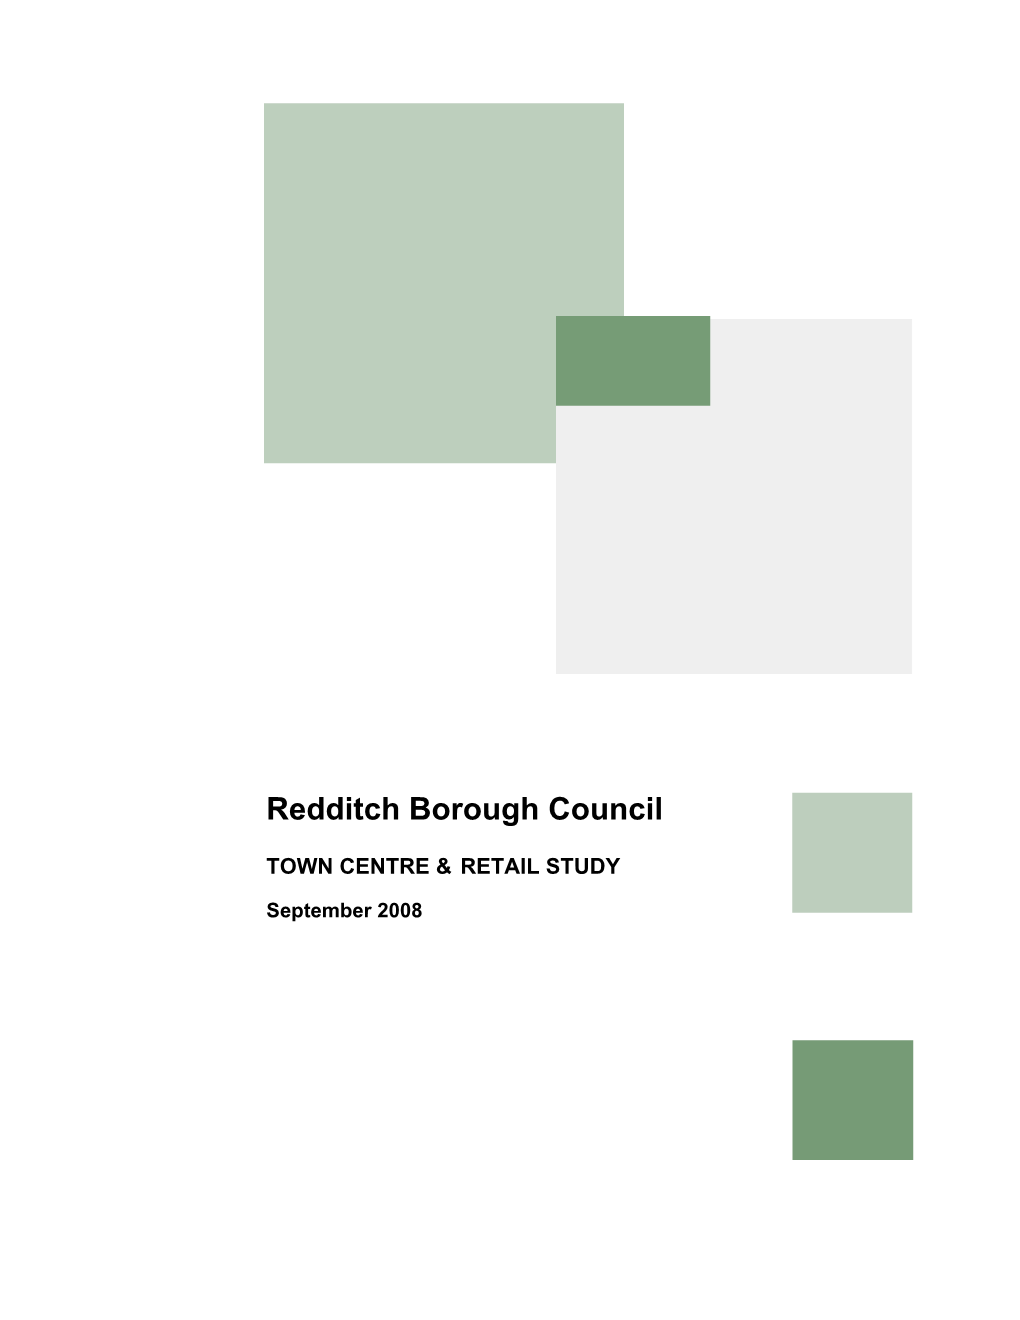 CDR9.3A Redditch Borough Council Town Centre and Retail Study